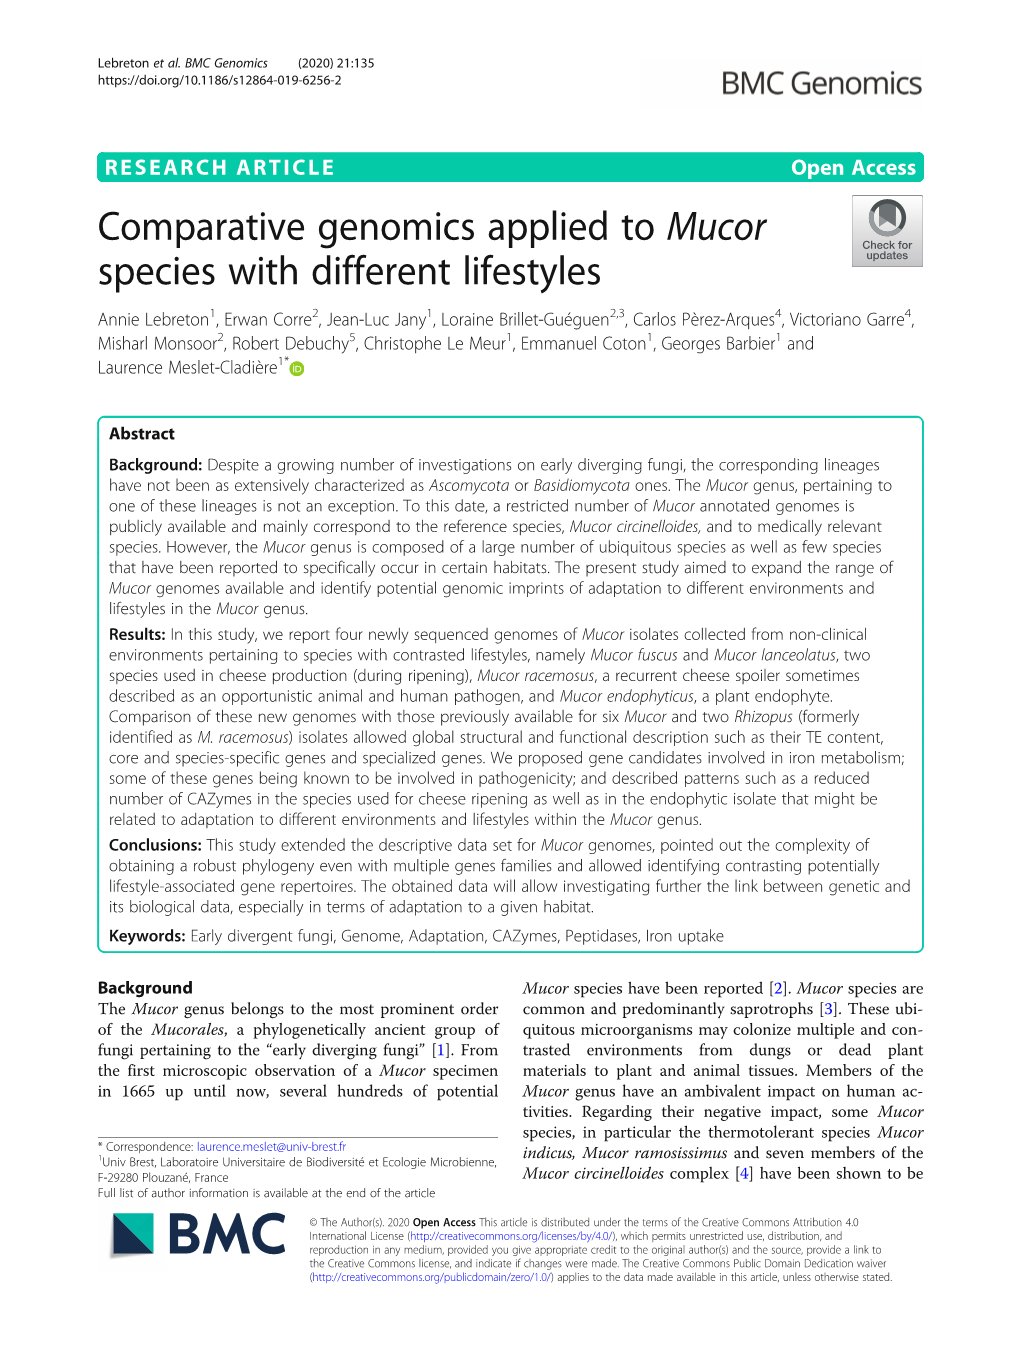 Comparative Genomics Applied to Mucor Species with Different Lifestyles